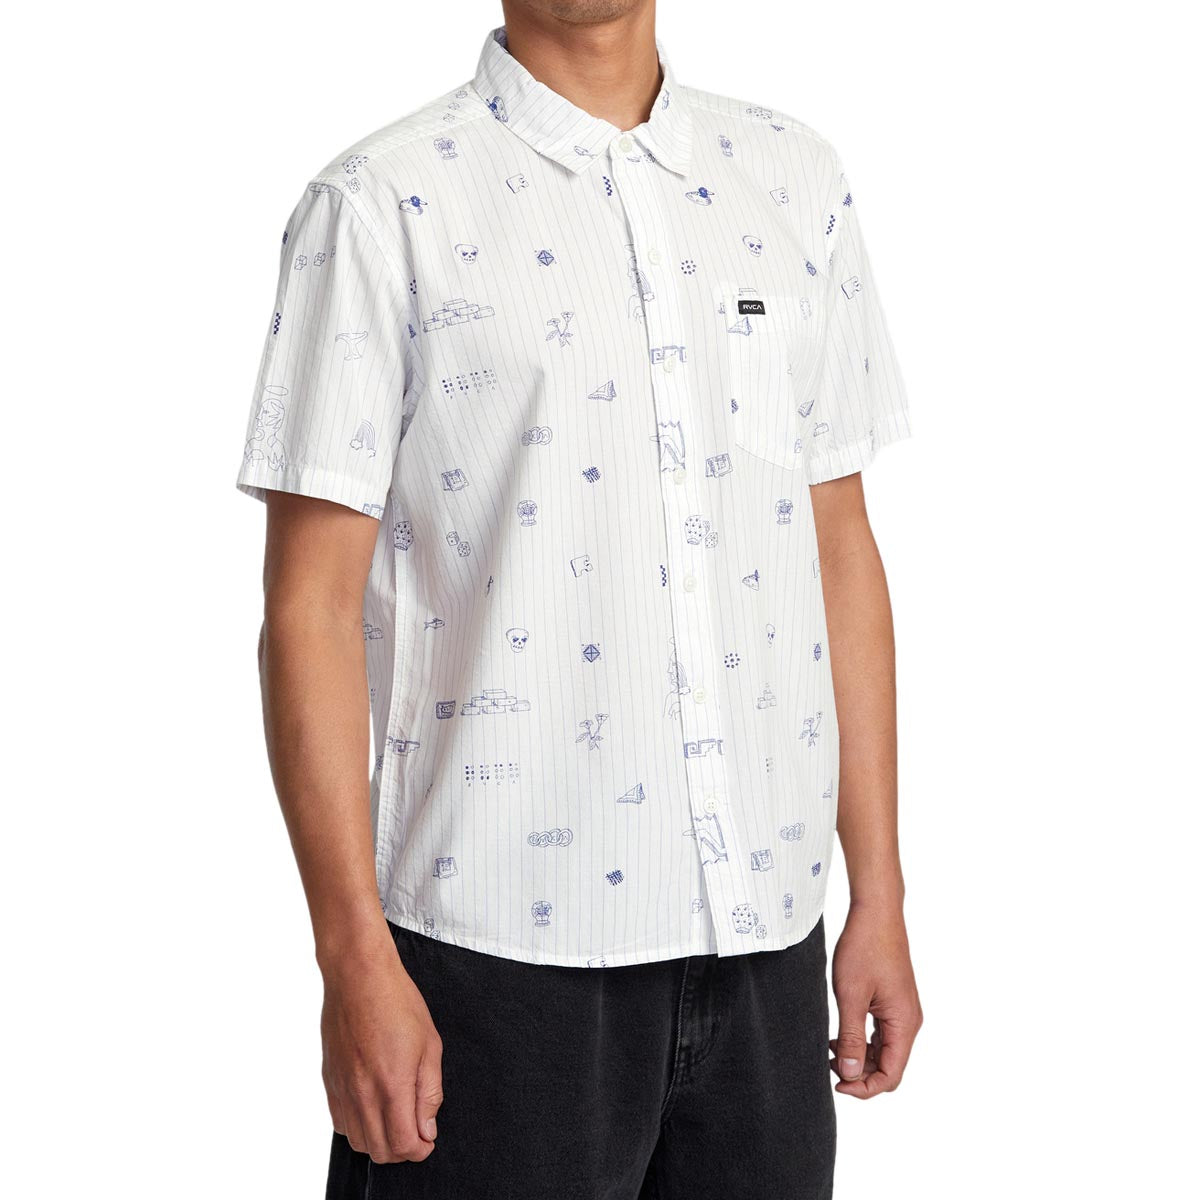 RVCA College Ruled Shirt - Antique White image 4